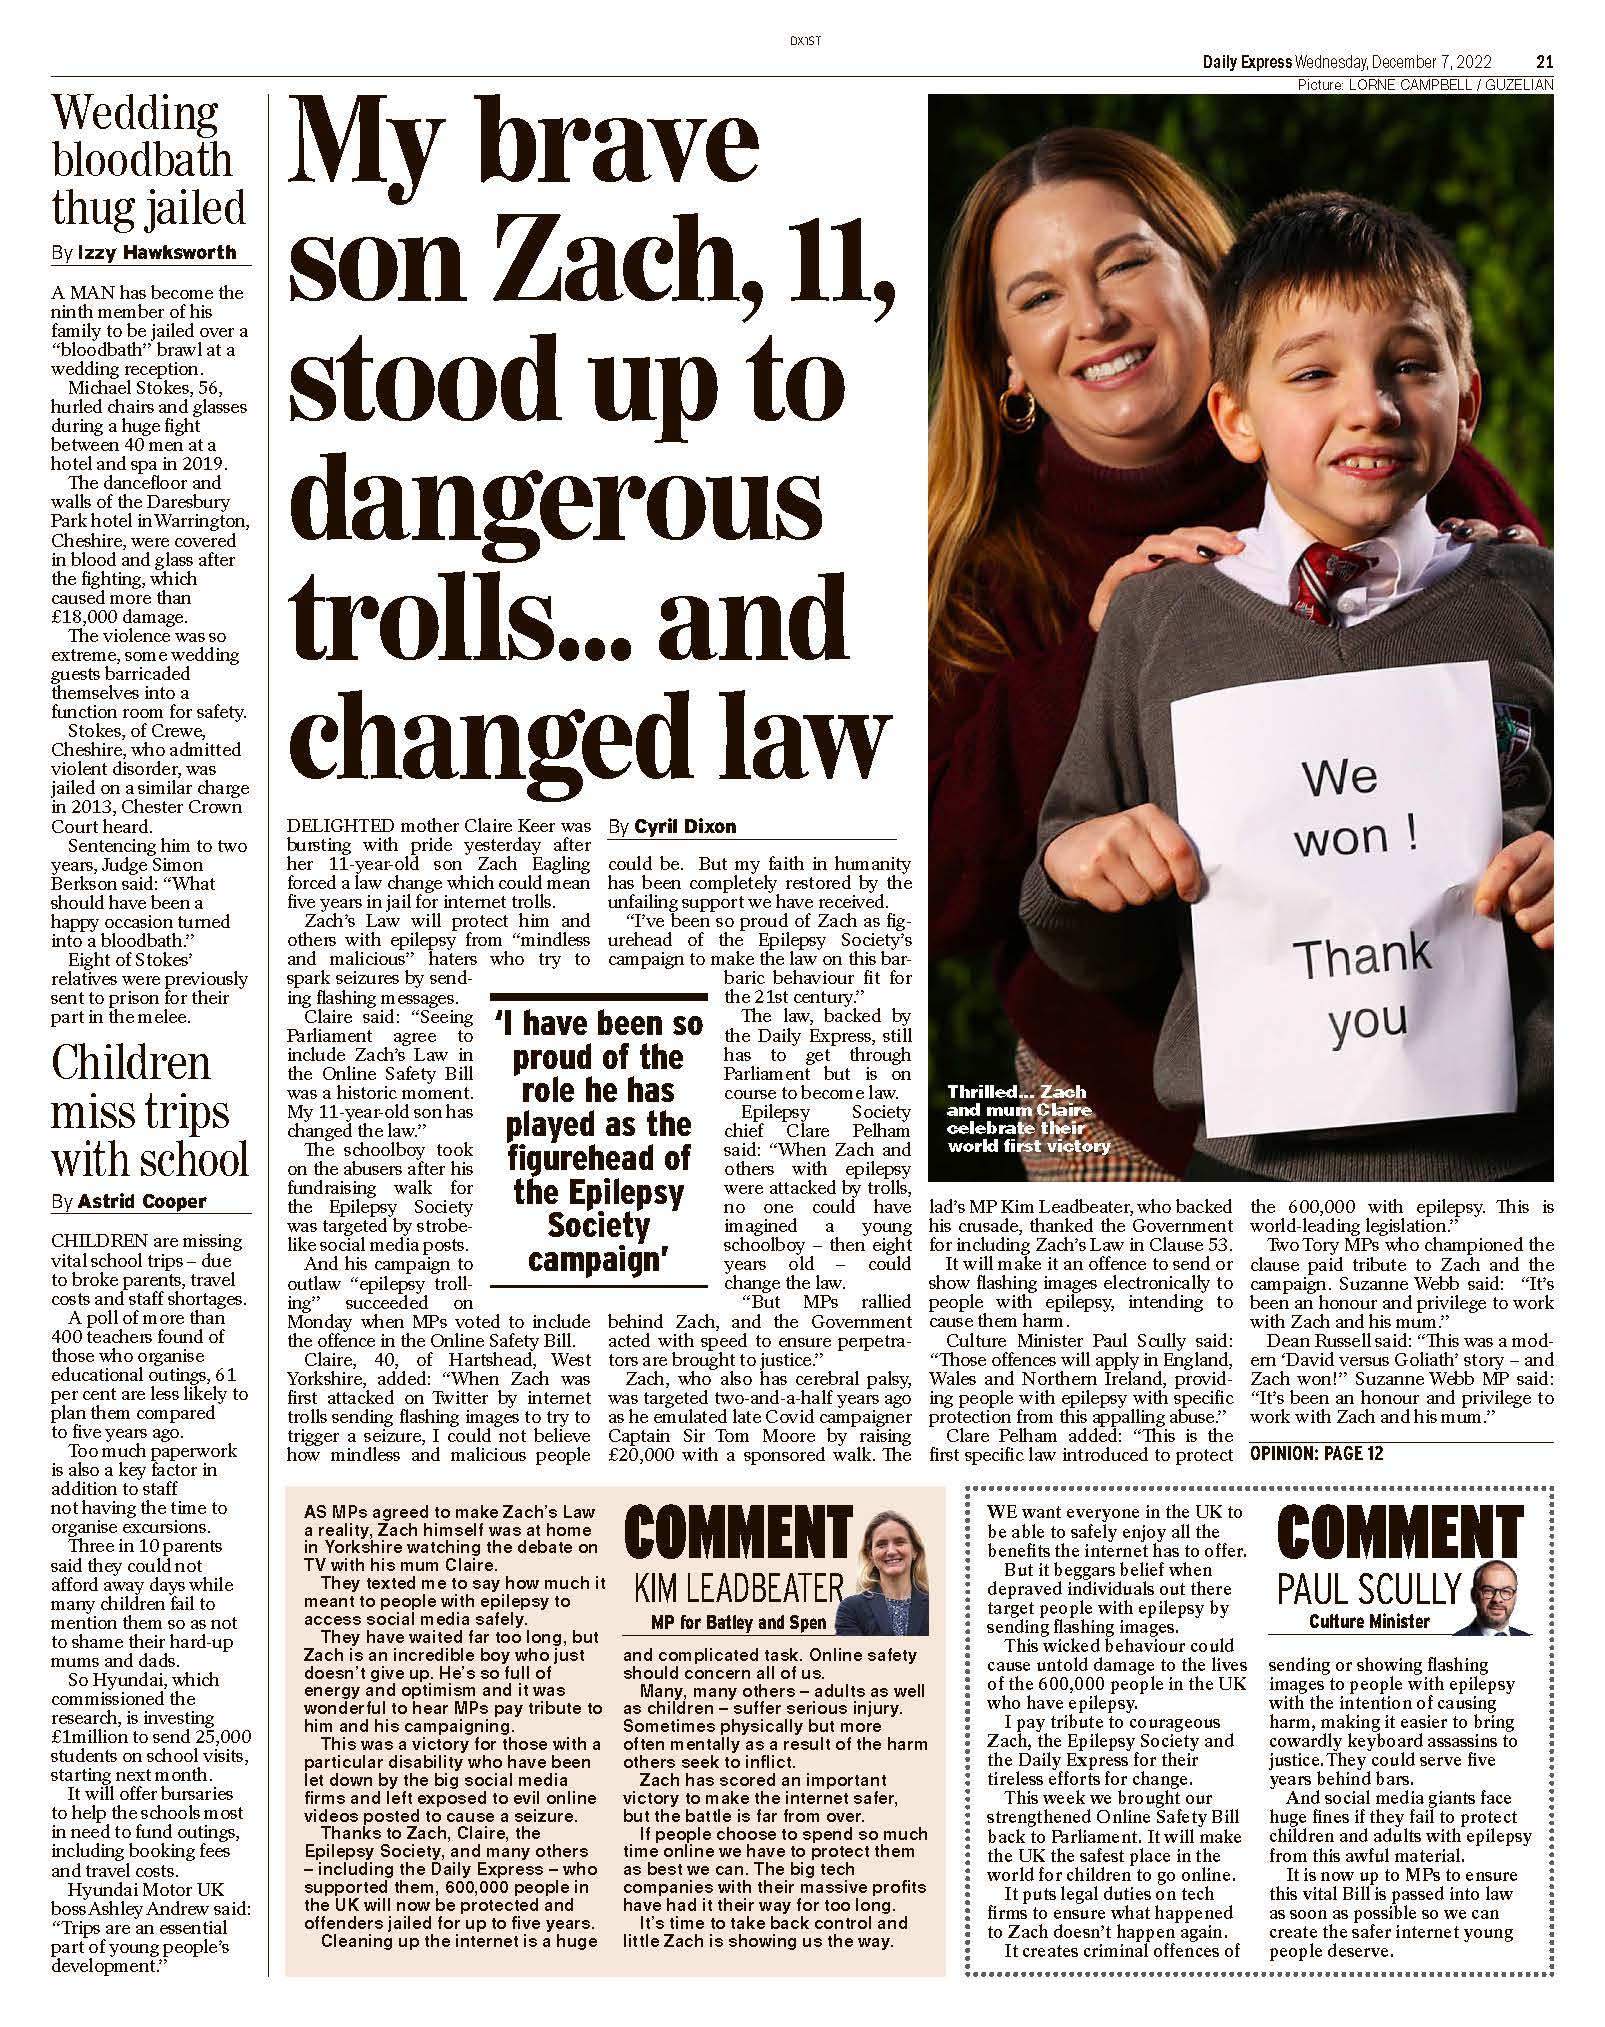 Page 21 of the Daily Express, featuring Zach's Law with comments from MPs